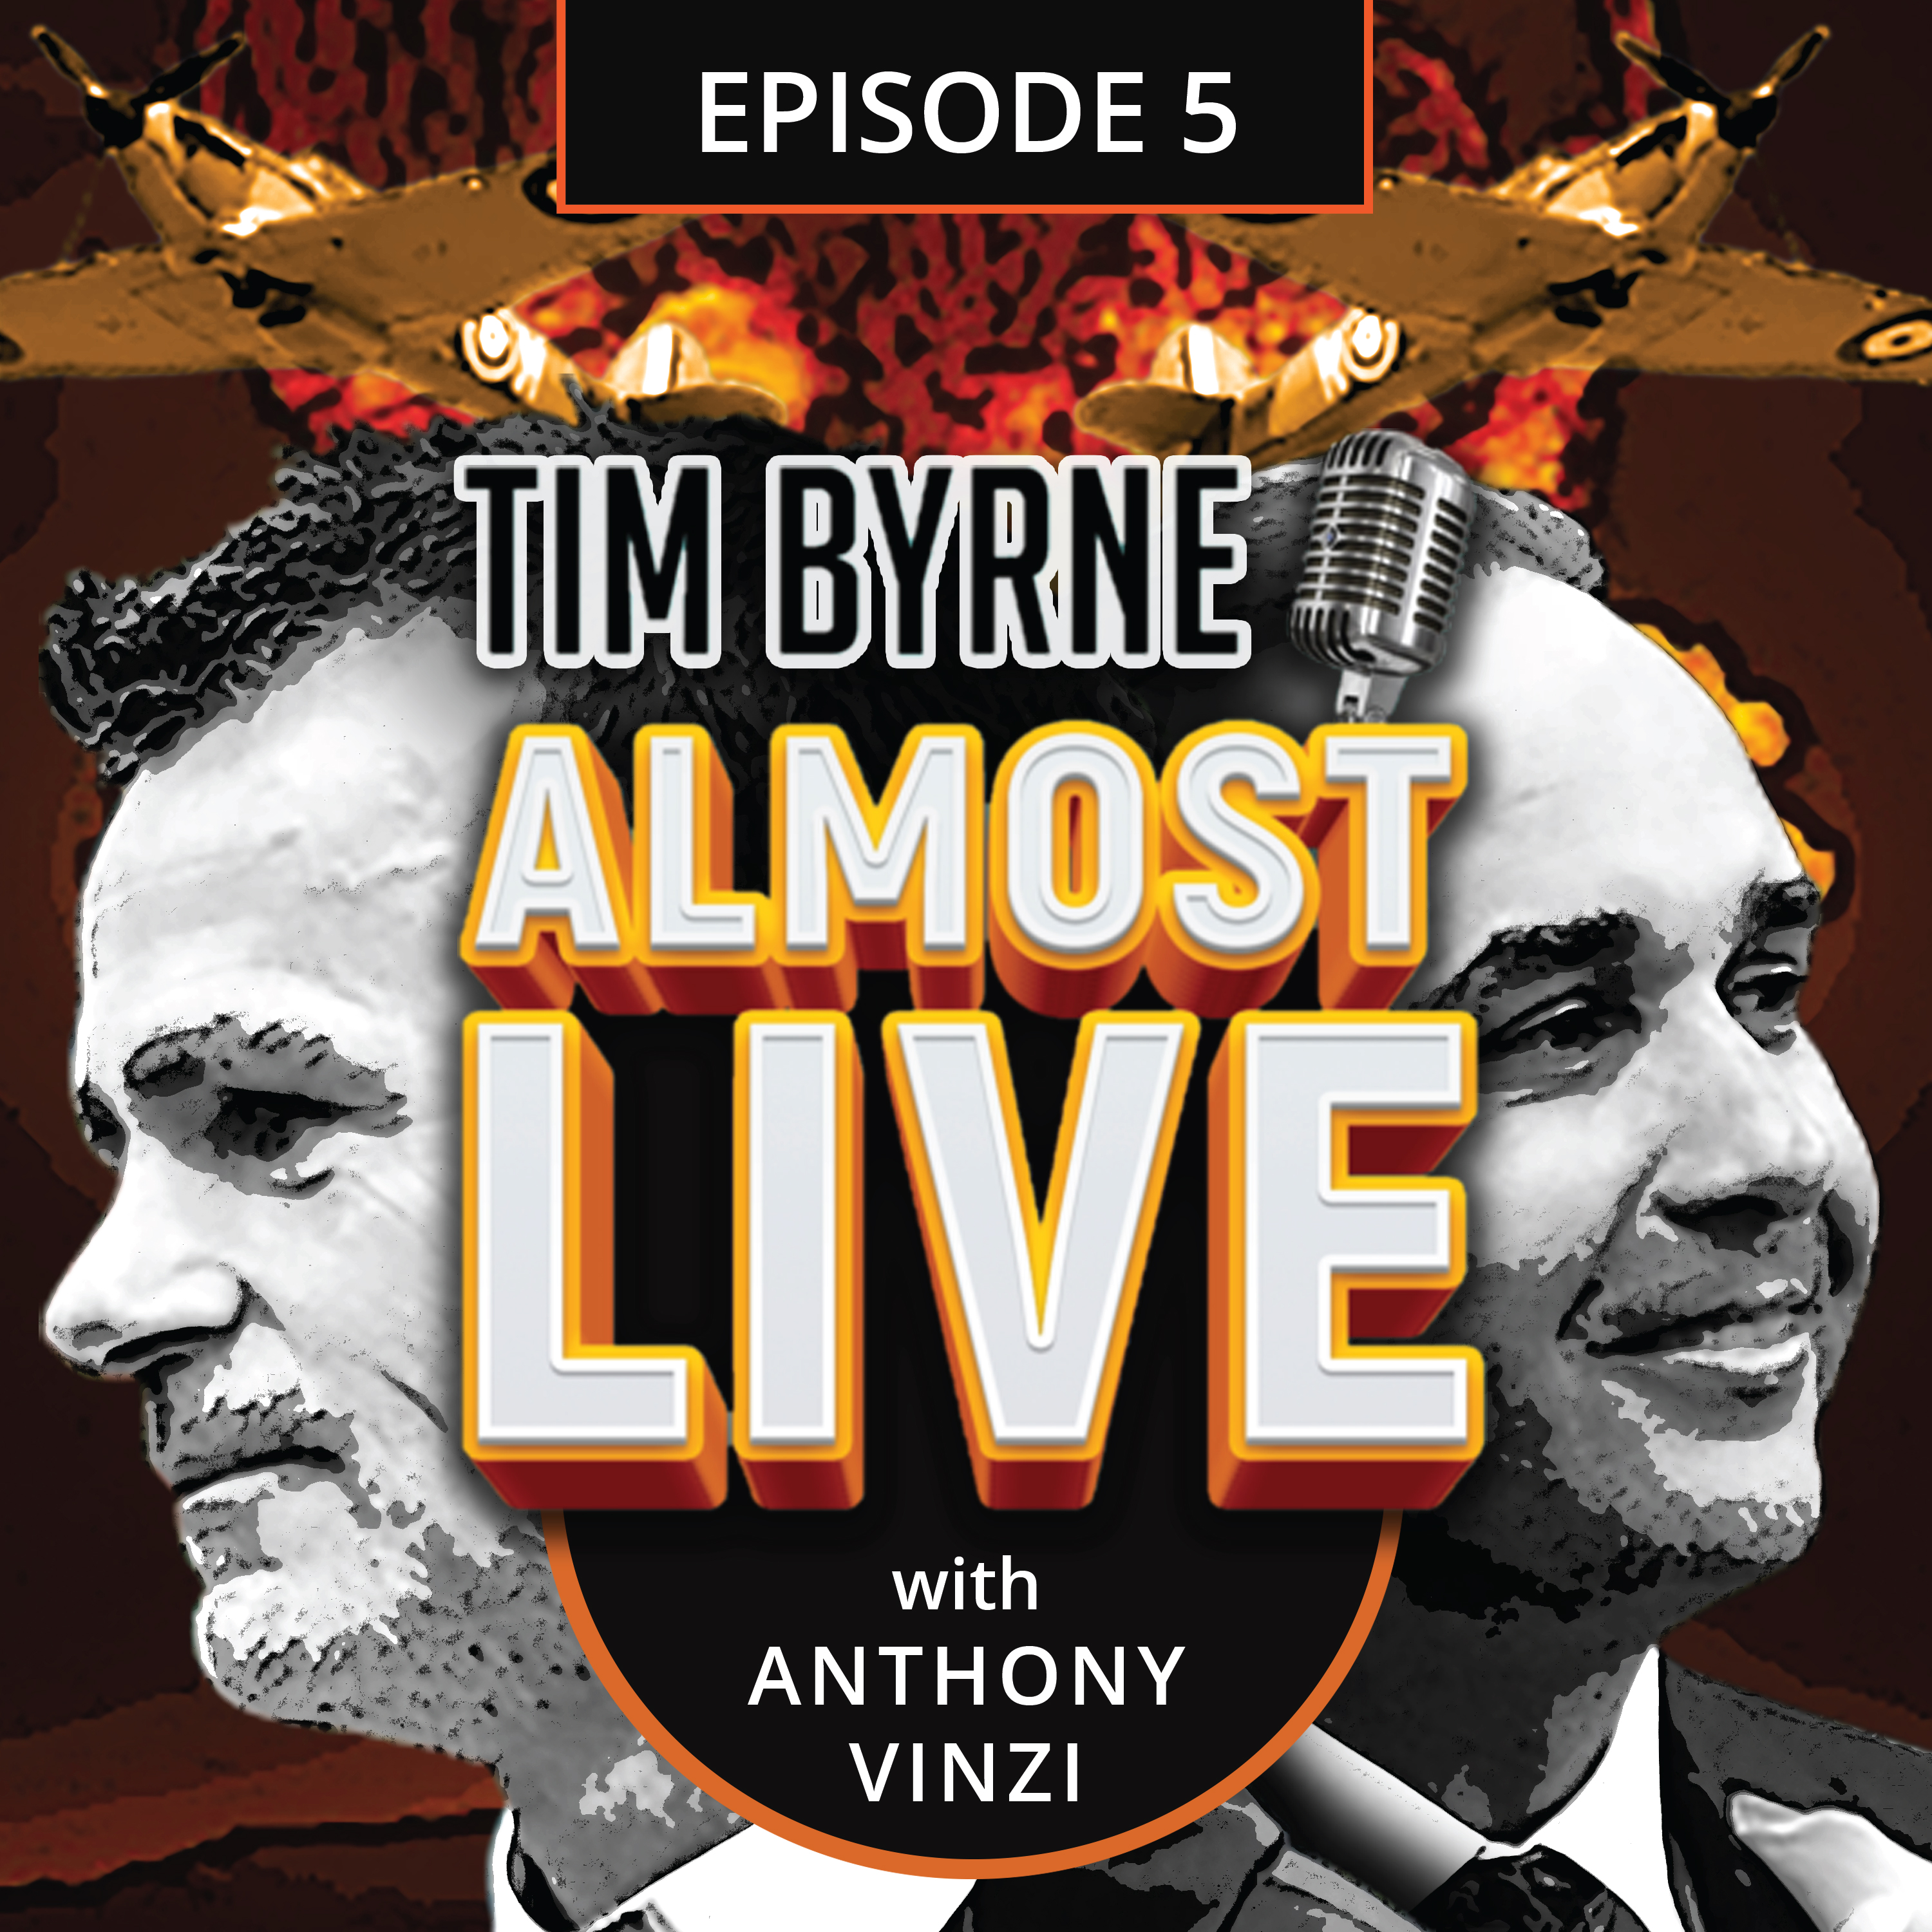 The road to Anthony Vinzi's appearance on this podcast was a long and arduous one. Tim and Anthony have known one another for over a decade. Their paths would occasionally cross on various construction projects. Anthony runs Promain Exterior Maintenance, a full service concrete and ashphalt company based in Woodbridge. But it was in 2010 when they really became friends. 2010 also happens to be the worst year of Tim's life. Though those two facts aren't related. Well, actually they kind of are. You see, Tim had a shit crazy year in 2010. His brother and he stopped talking to one another after many years of working together in the family business. But that's a topic for another podcast. Then in March of that year Tim was forced to admit to an affair. He was sued in April by one of the women for sexual harassment. Tim and his then wife broke up and he moved out of the house. Then in October Tim's 20 year old son Hilton was left in a coma after a skateboarding accident. He remained in St. Michael's hospital for 21 days before he succumbed to his injuries. Tim was a broken man as he recounts in the episode. “I was embarrassed. I was a mess. My heart was broken, my ego shattered and my reputation was in tatters,” he remembers. That's when Anthony enters the picture. Tim had hired Anthony to pave a driveway at one of his properties. Those plans were shelved after Hilton's accident. Tim basically stayed inside his house and didn't leave for days at a time. Getting out of bed was next to impossible. But once a week Tim would hear a light tap at the door. He almost never got up to see who it was. But eventually, he would open the door to find a large Tim Horton's coffee on the stoop. It was usually frozen solid by then and there was no sign of who has left it. This went on for several weeks. Then one morning Tim happened to up when the knock came. He opened the door to find Anthony's orange coat descending the stairs. “Hey!” Tim said. “Oh hey man,” Anthony answered. “I just wanted to make sure you were OK.” That began a years long friendship that culiminates in this week's episode.